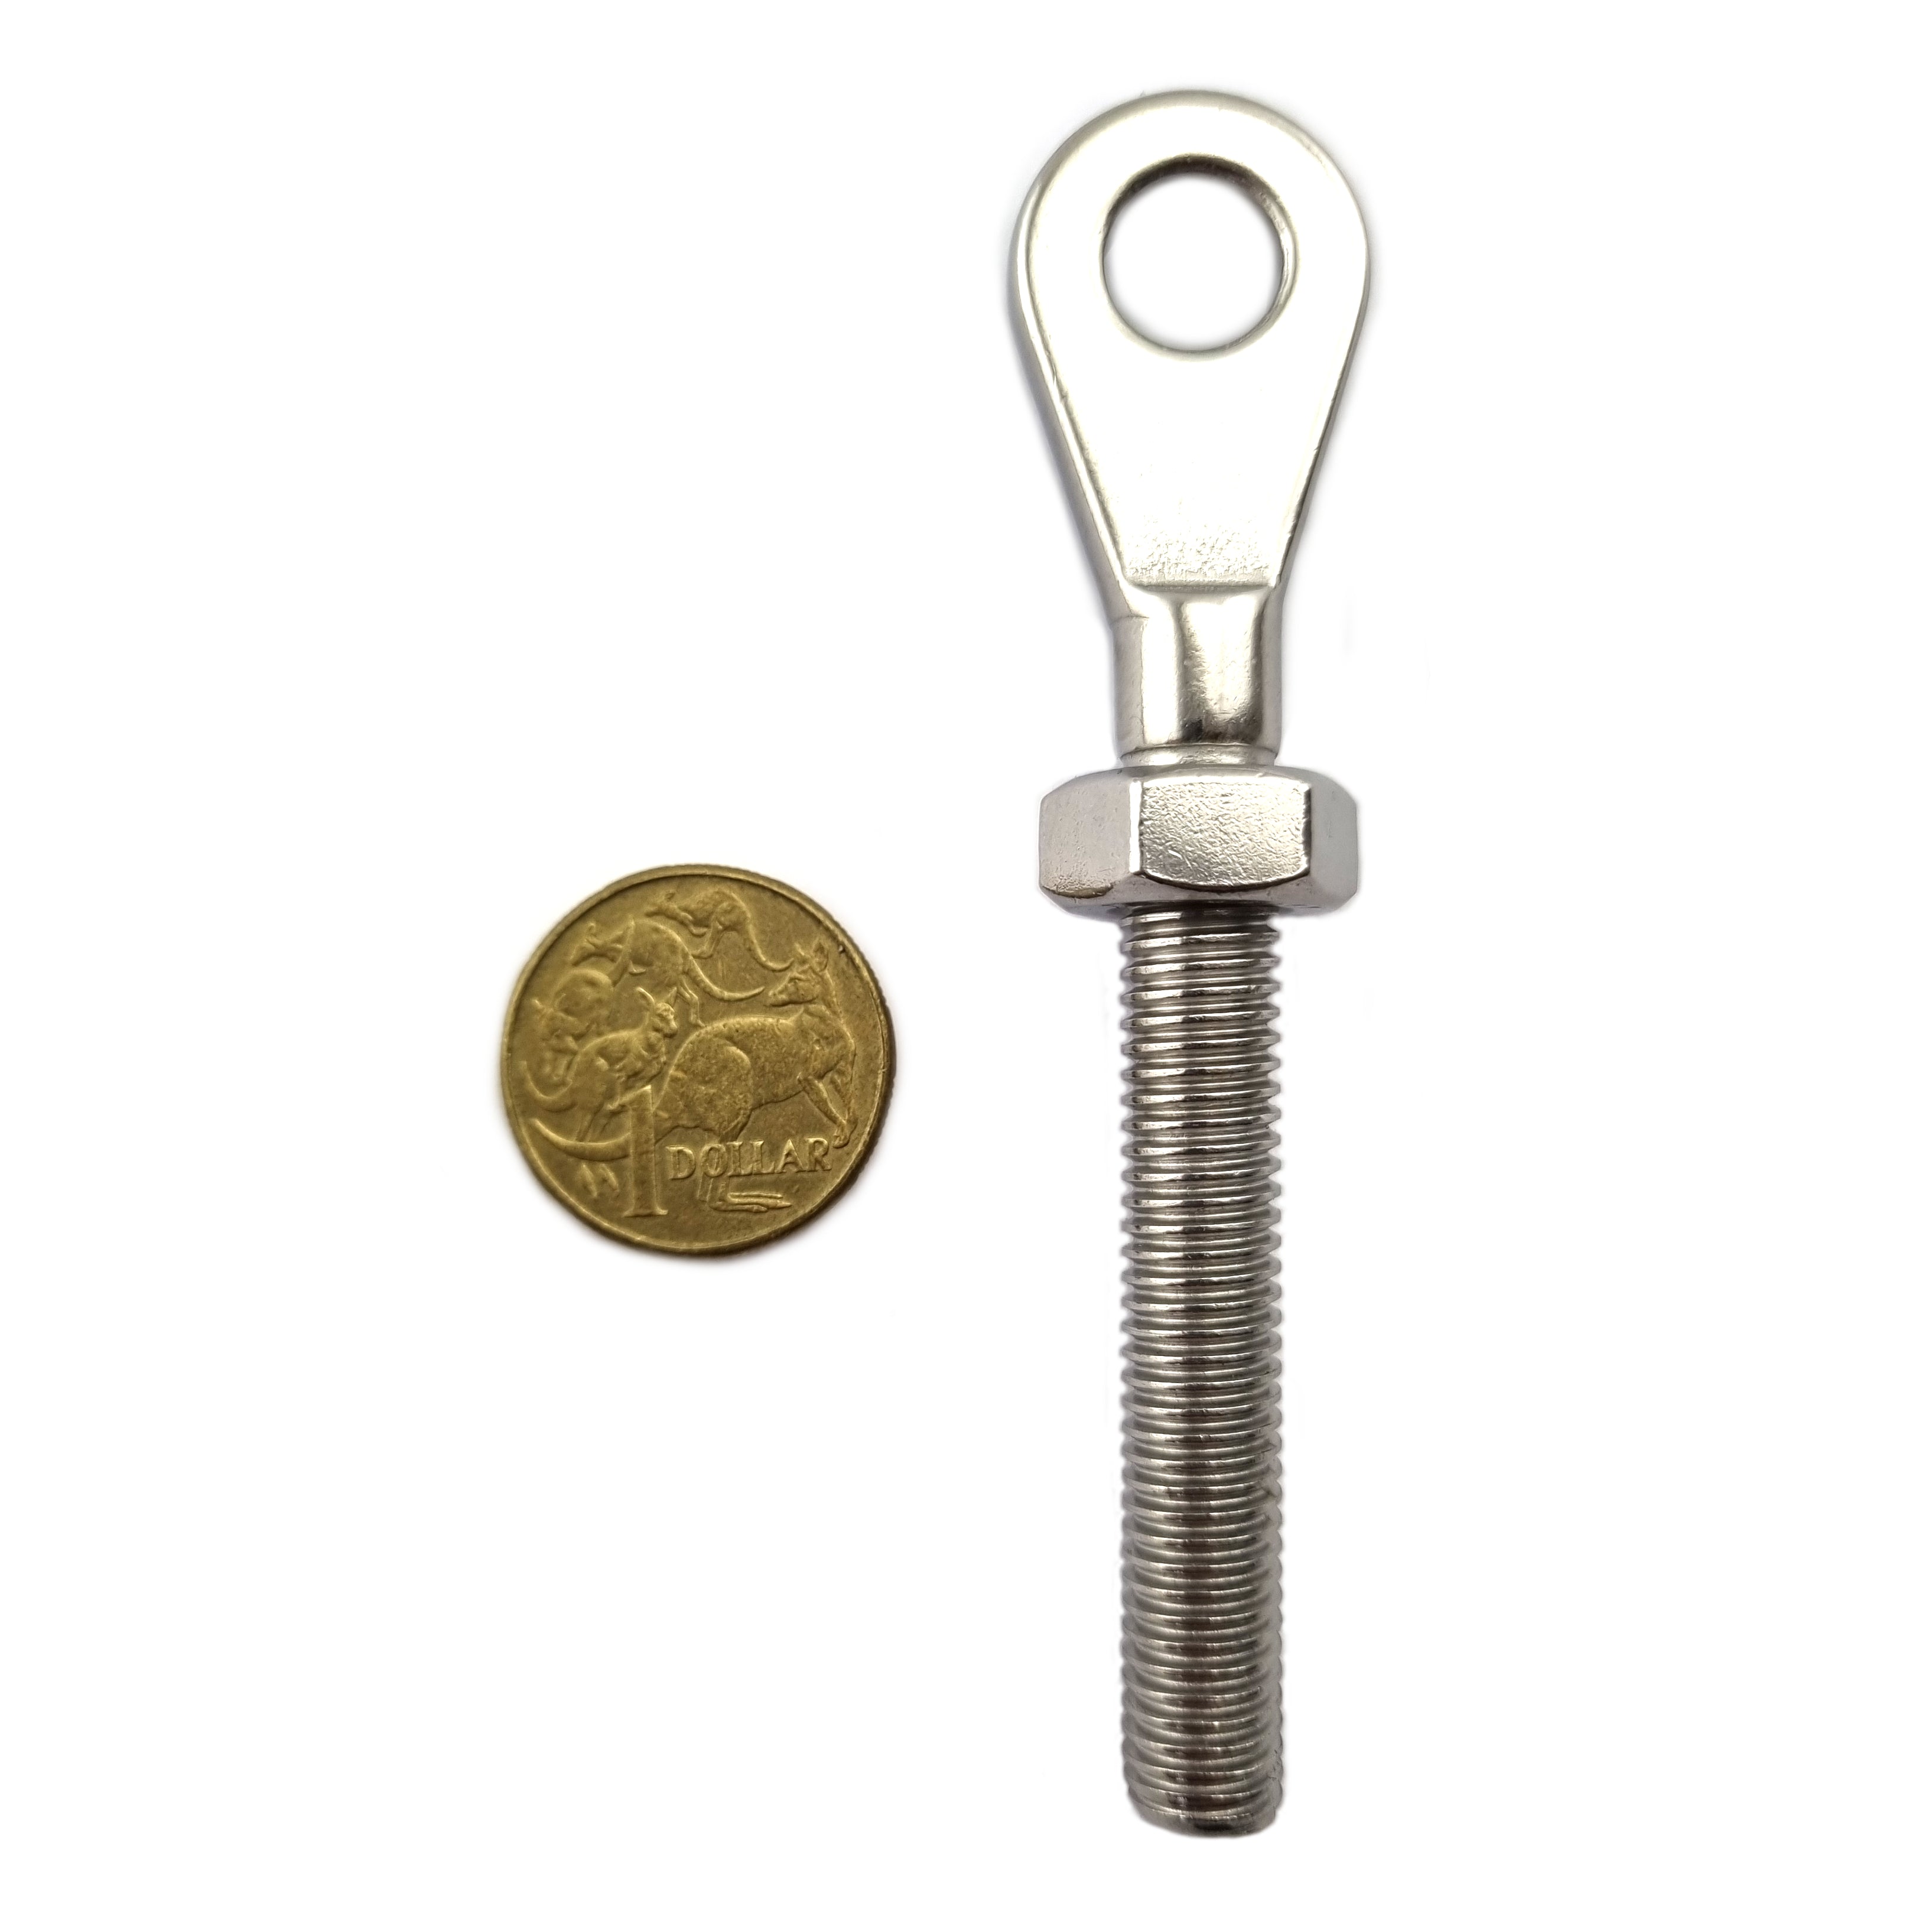 10mm Eye Terminal in Stainless Steel with a 60mm thread. Shop chain.com.au